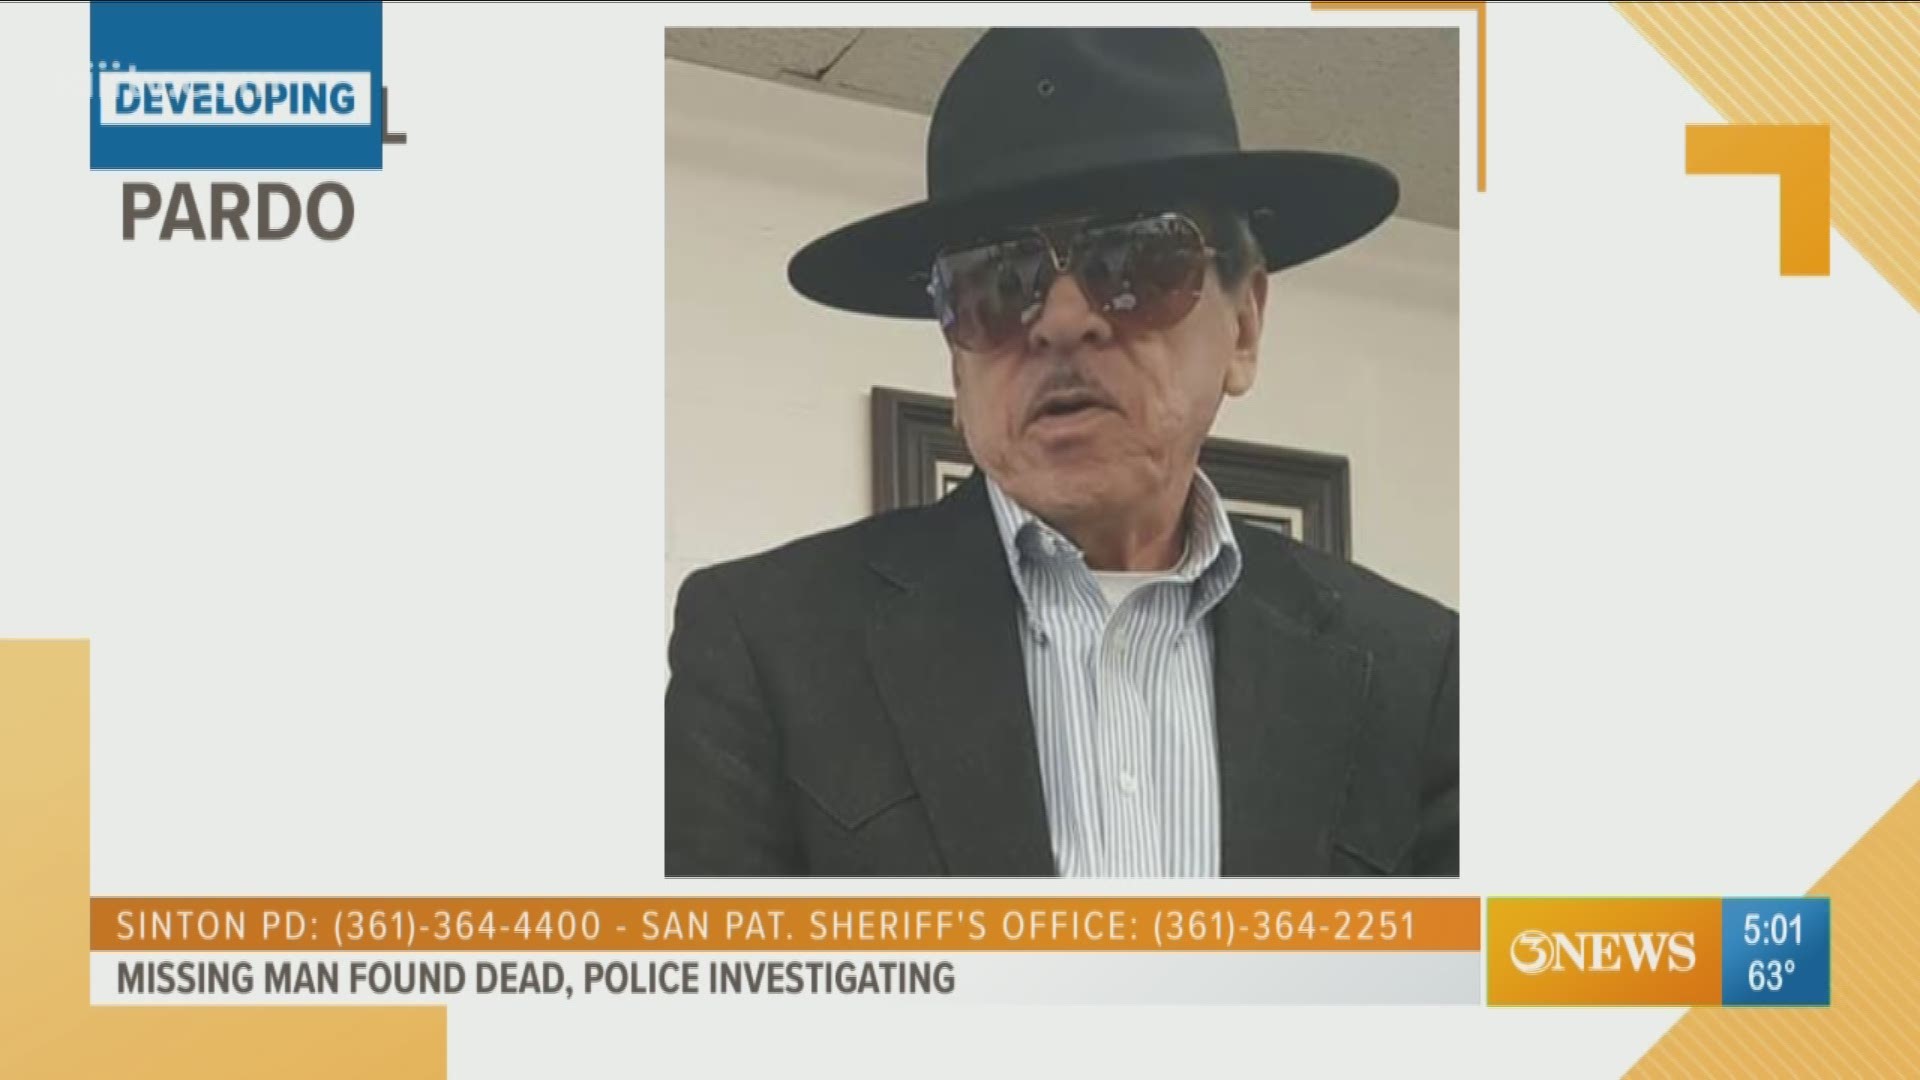 The Sinton Police Department believe foul play was involved in the death of a 71-year-old man whose body was found on Sunday.